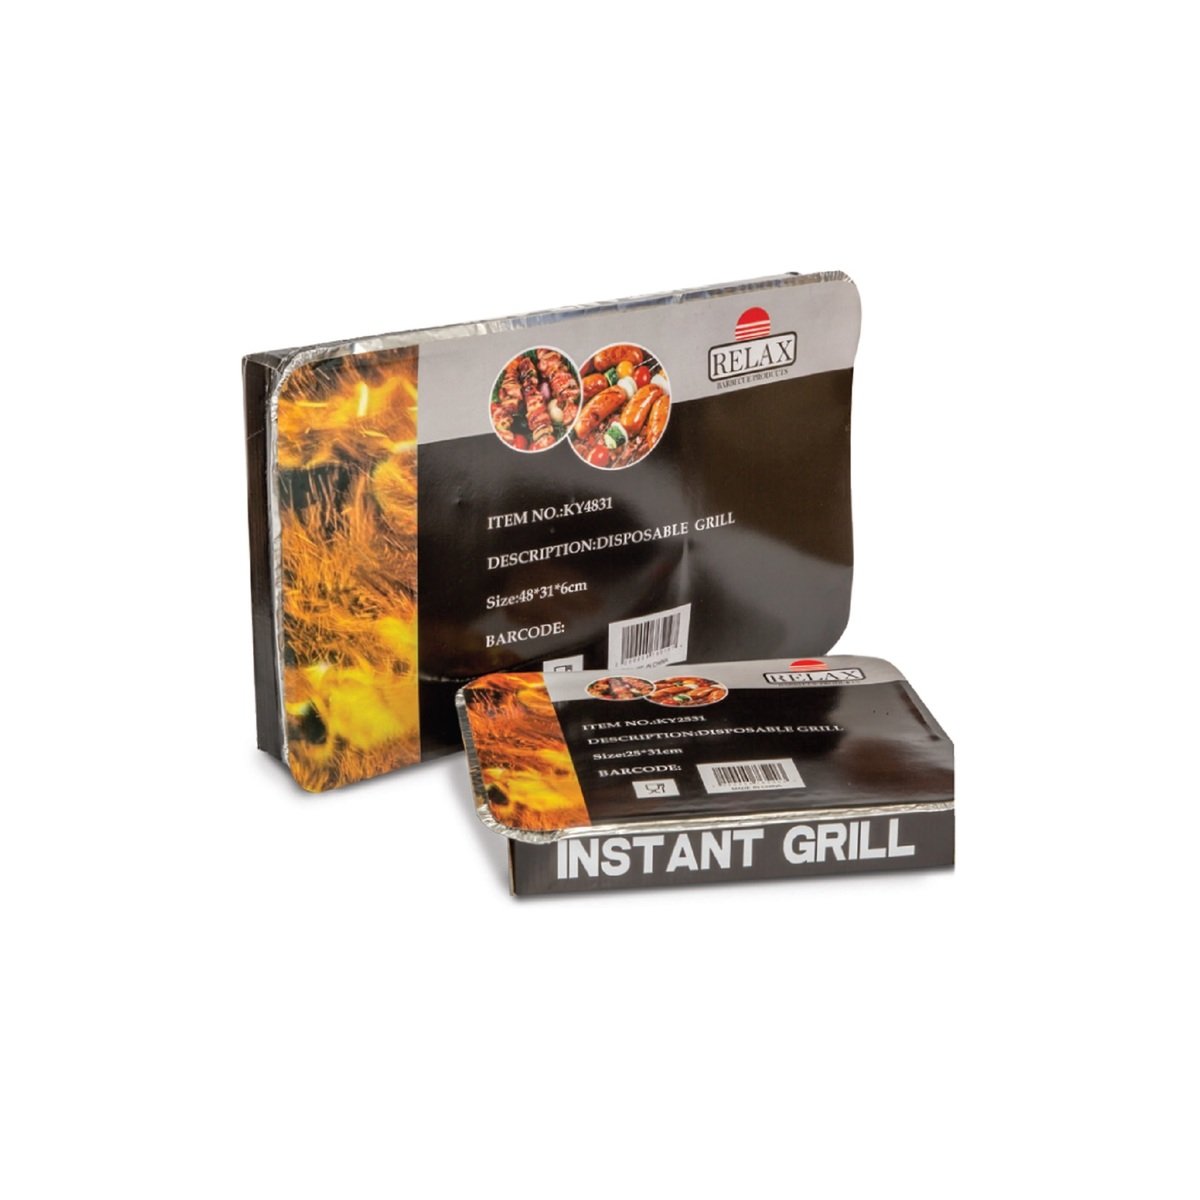 Royal Relax Disposable Grill KY2531 1pc